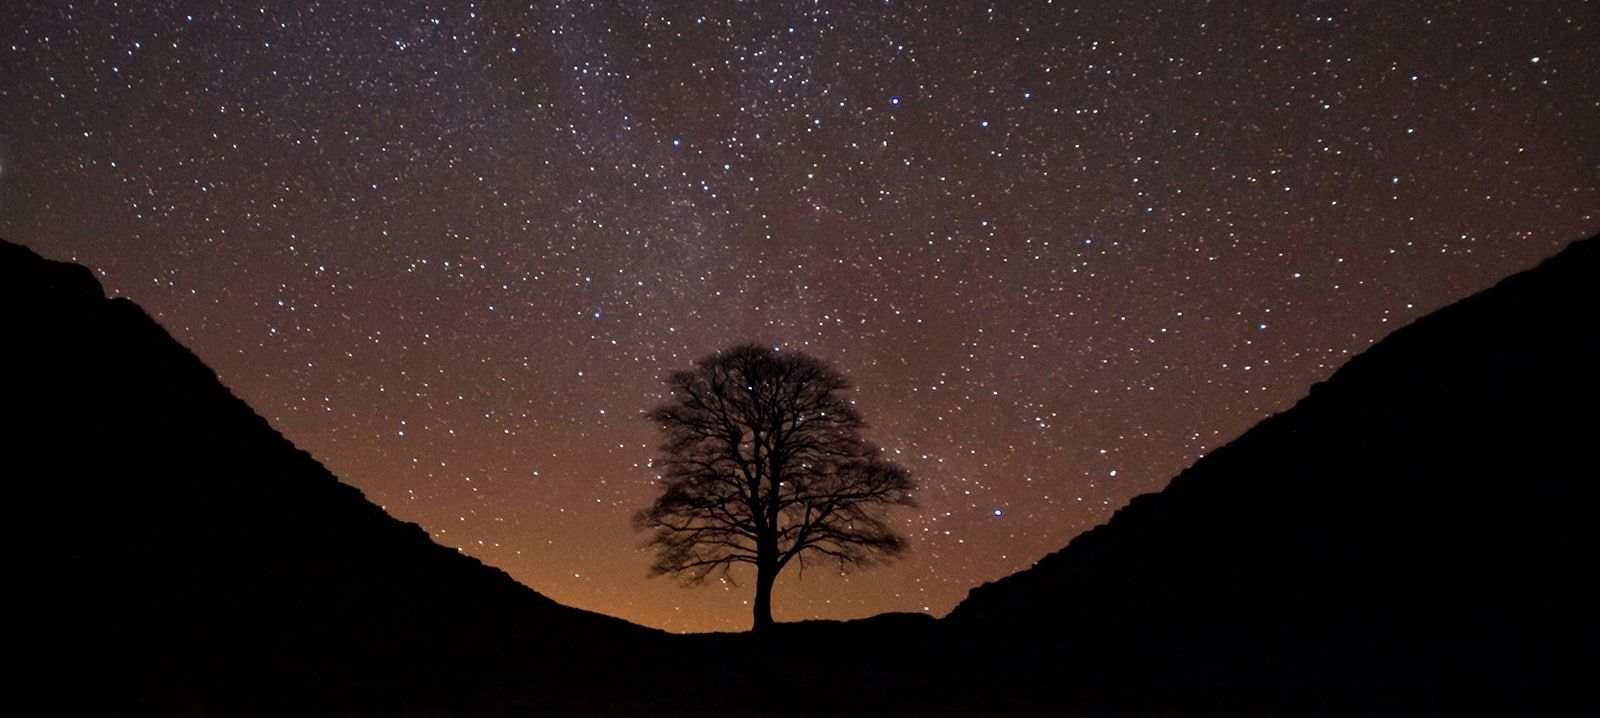 You Too Can Enjoy England’s Virtual Dark Skies Festivals From Home